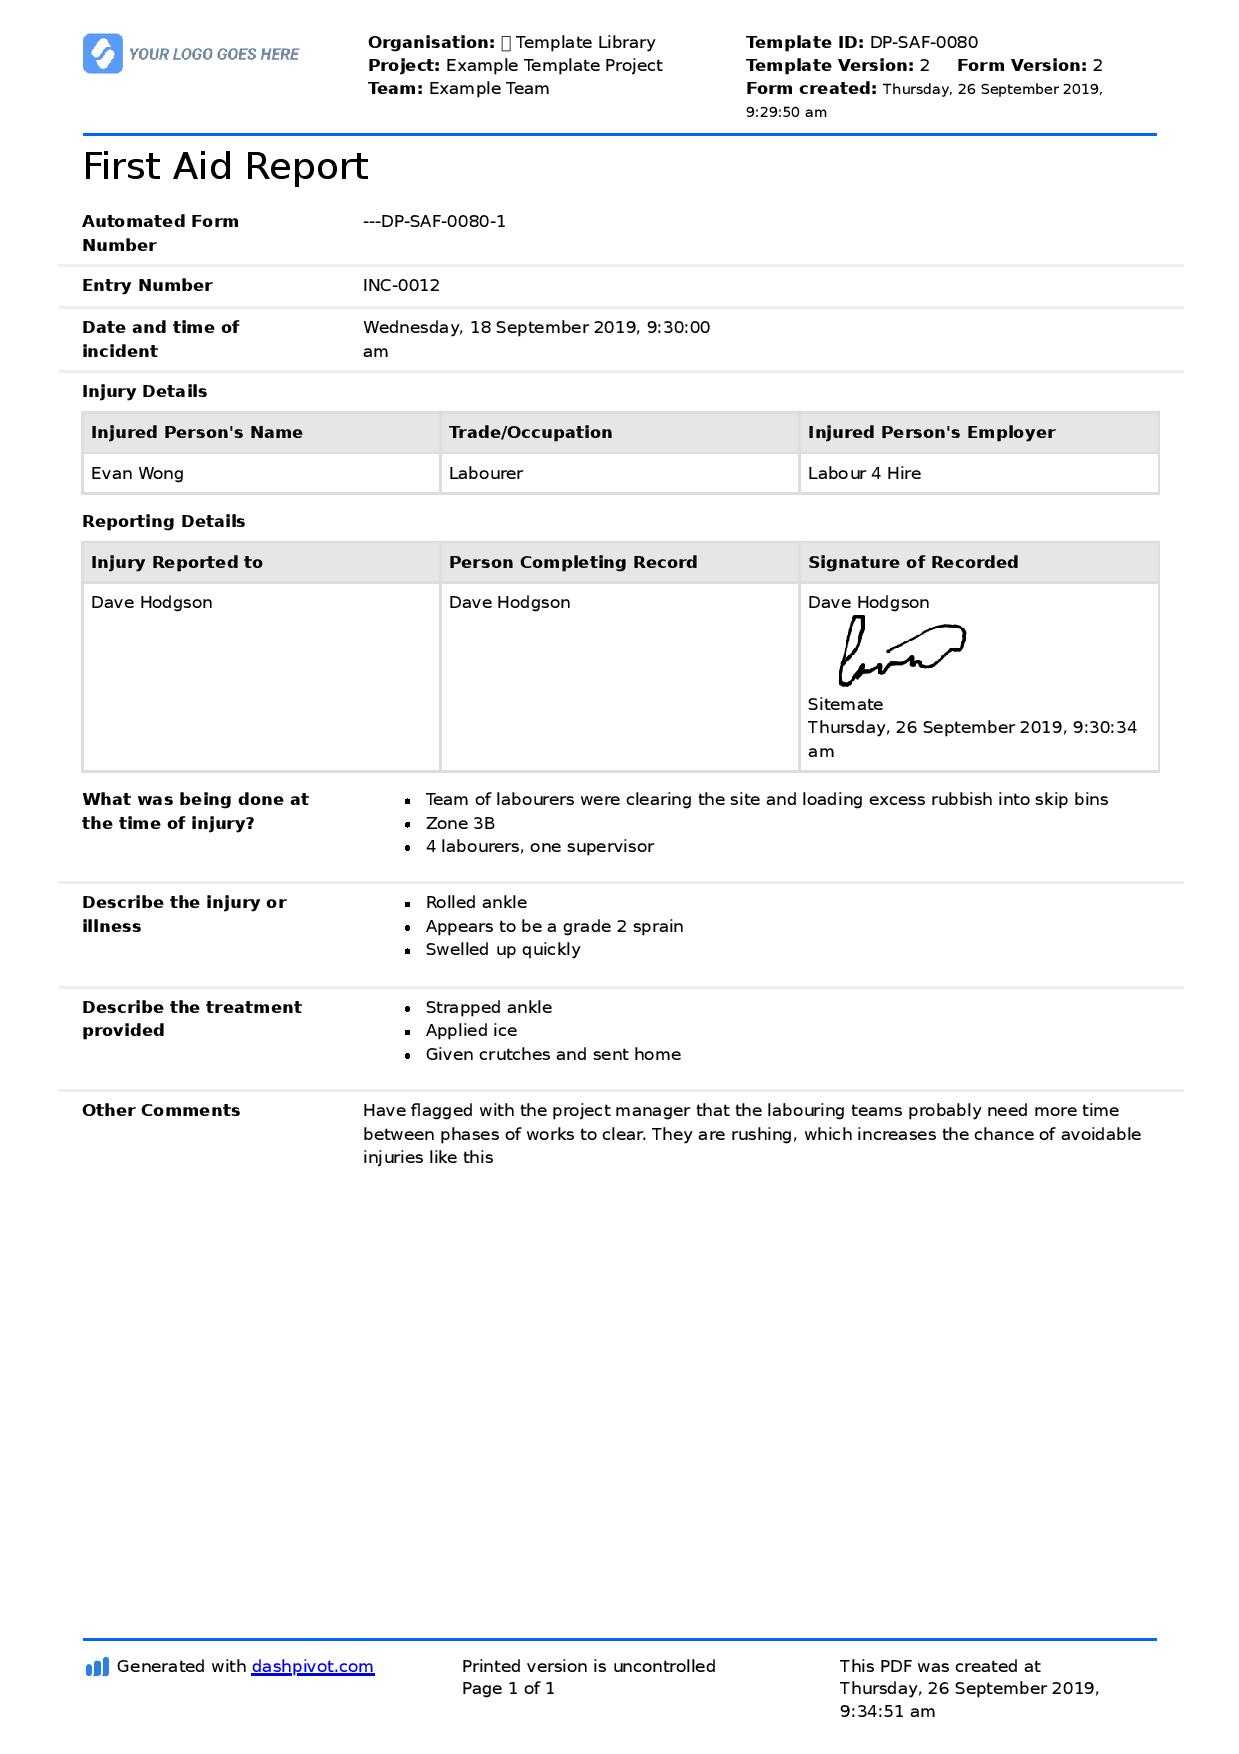 First Aid Report Form Template (Free To Use, Better Than Pdf) Pertaining To First Aid Incident Report Form Template